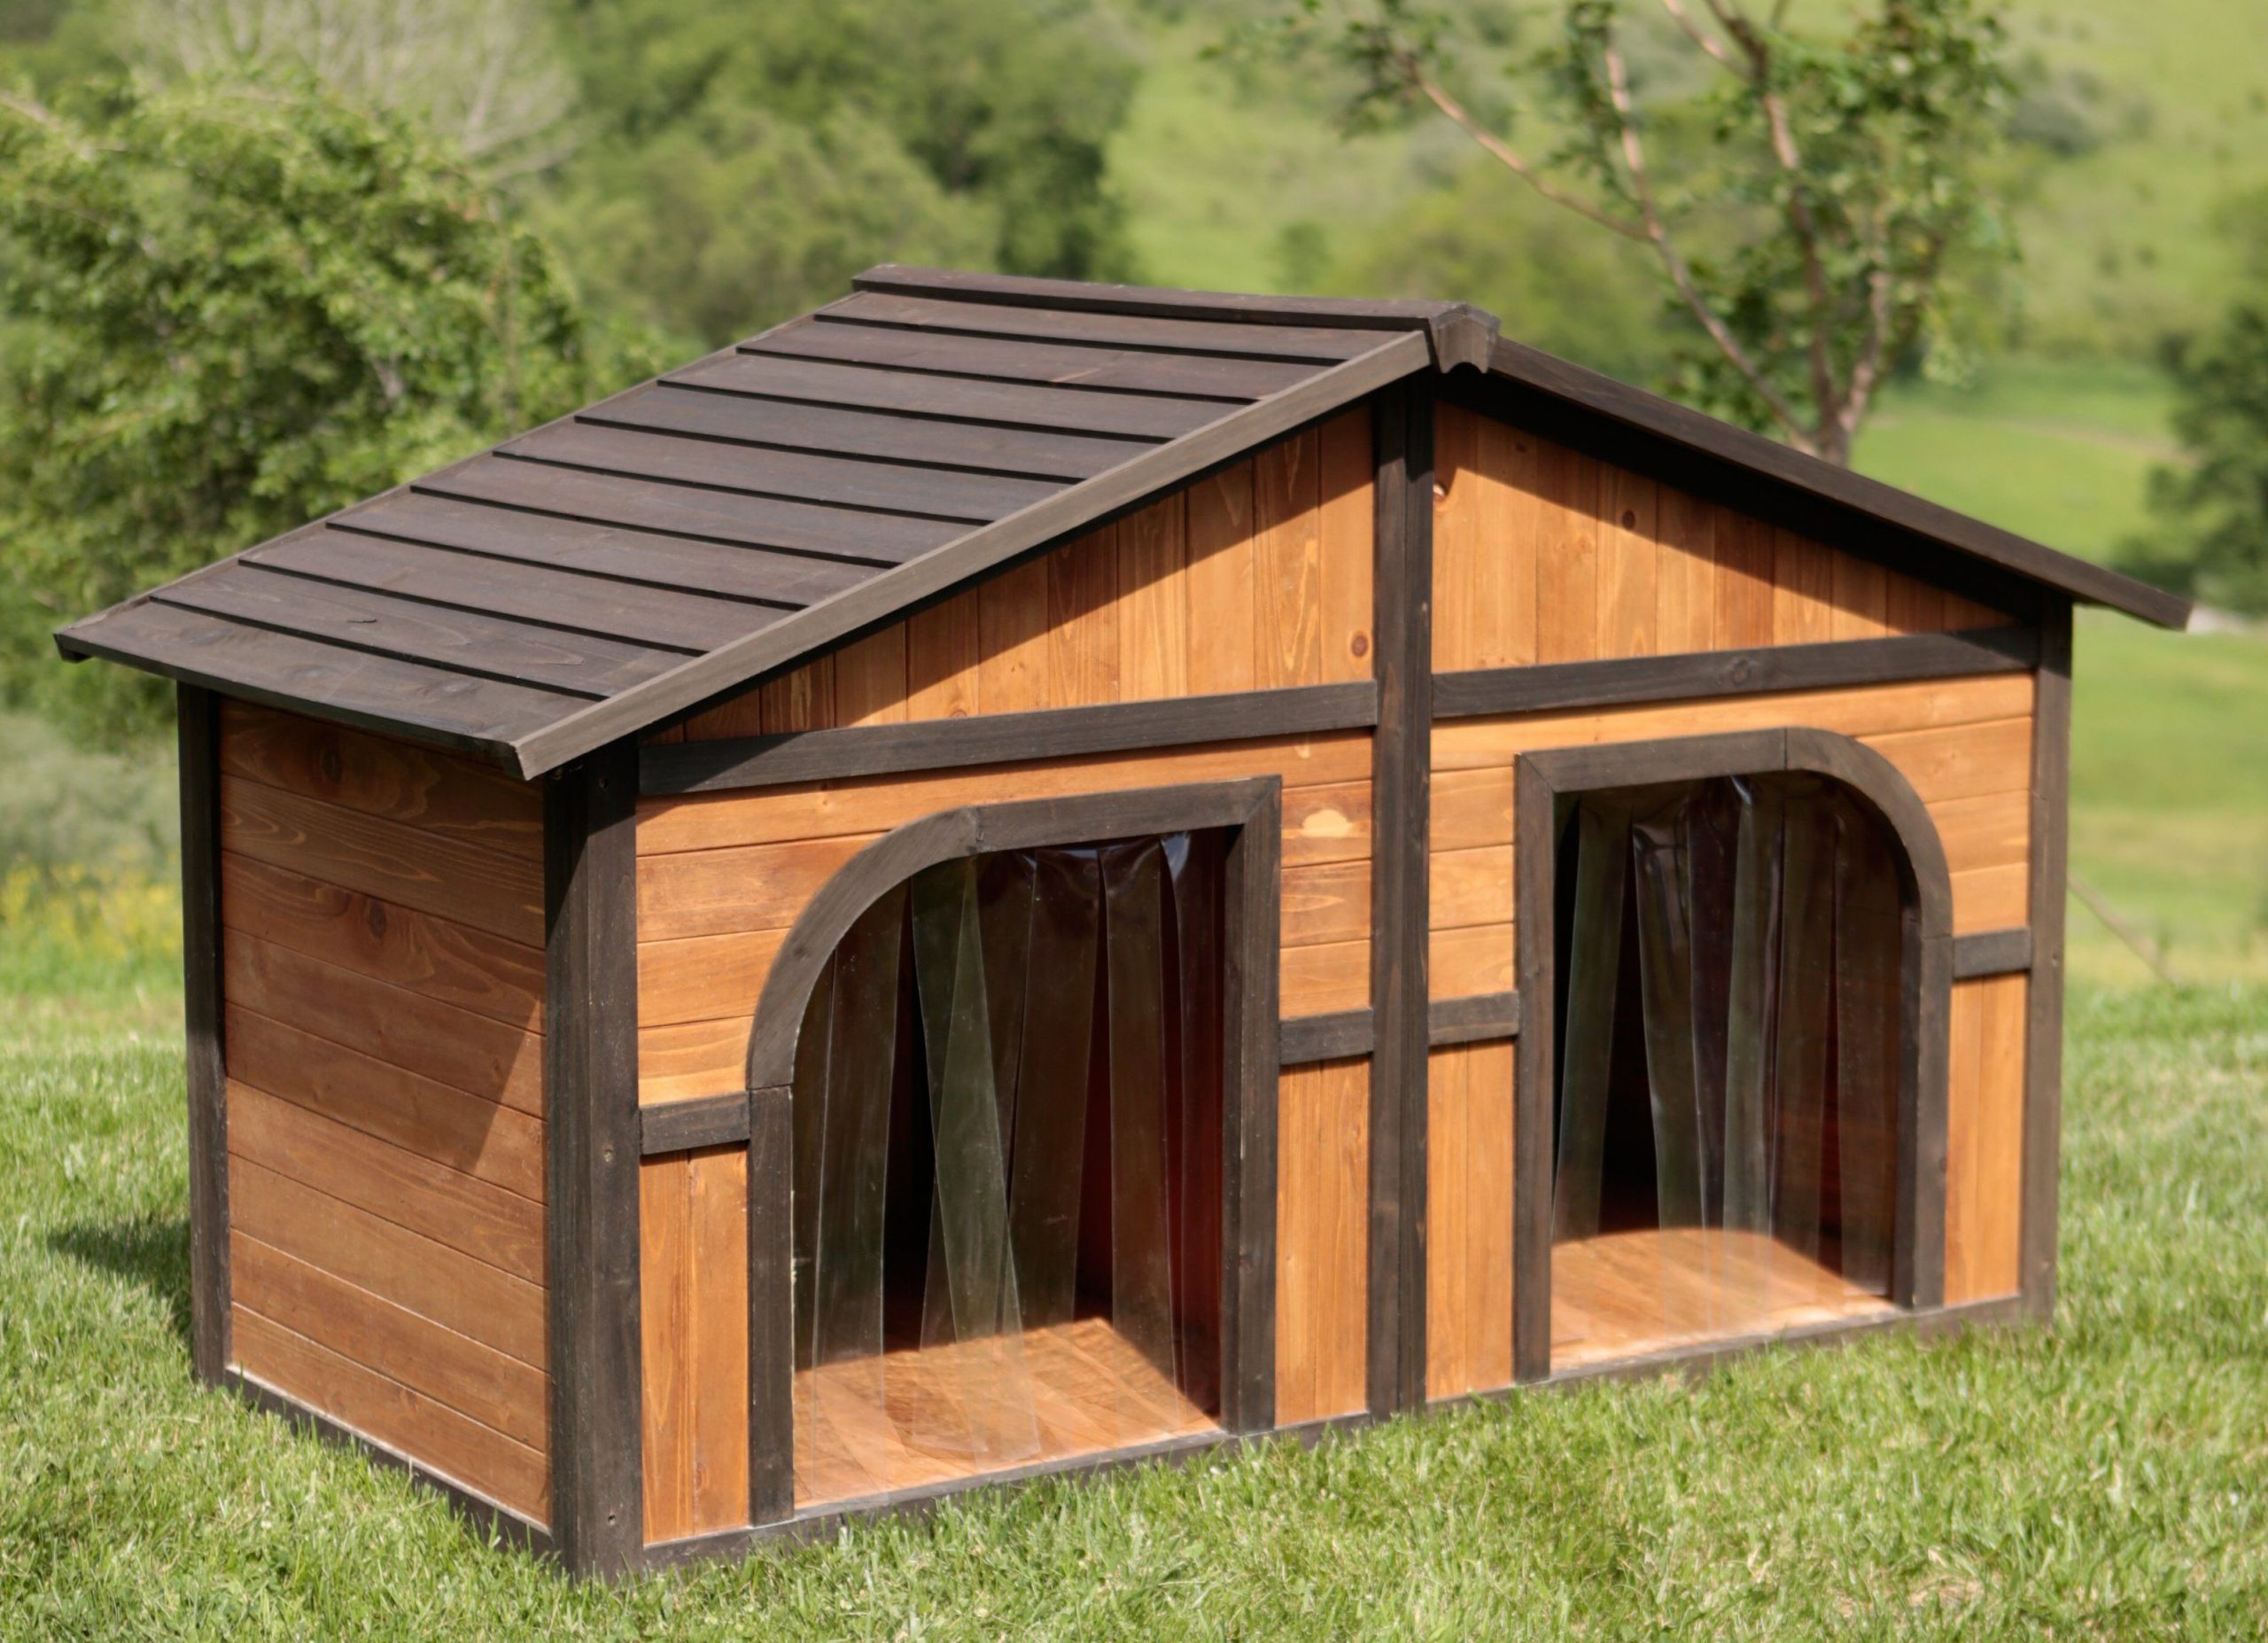 DIY Dog House Plans
 10 Simple But Beautiful DIY Dog House Designs That You Can